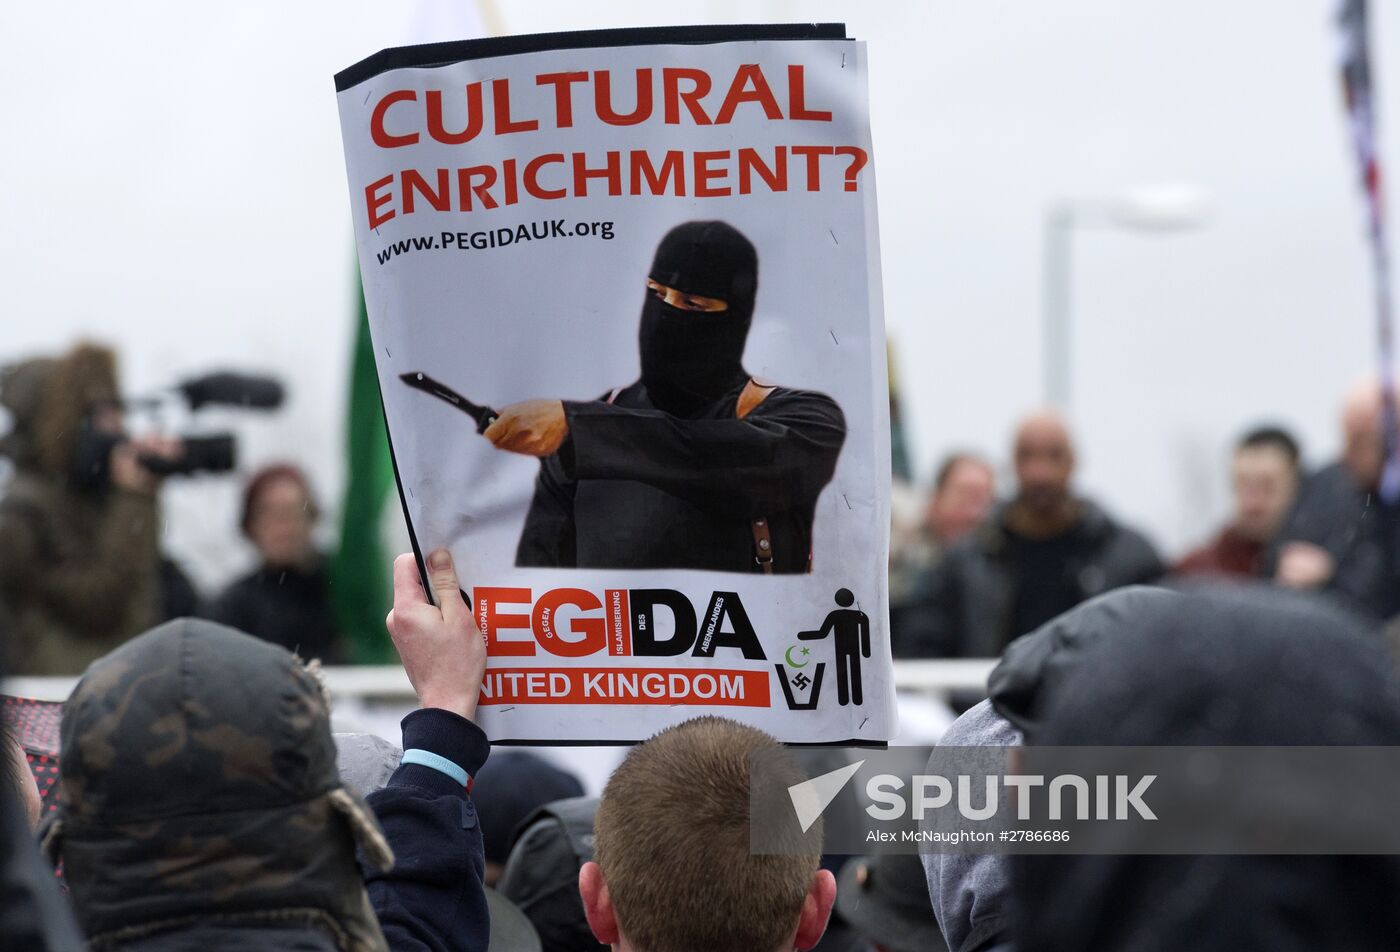 Rallies against "the Islamization of Europe" in European countries